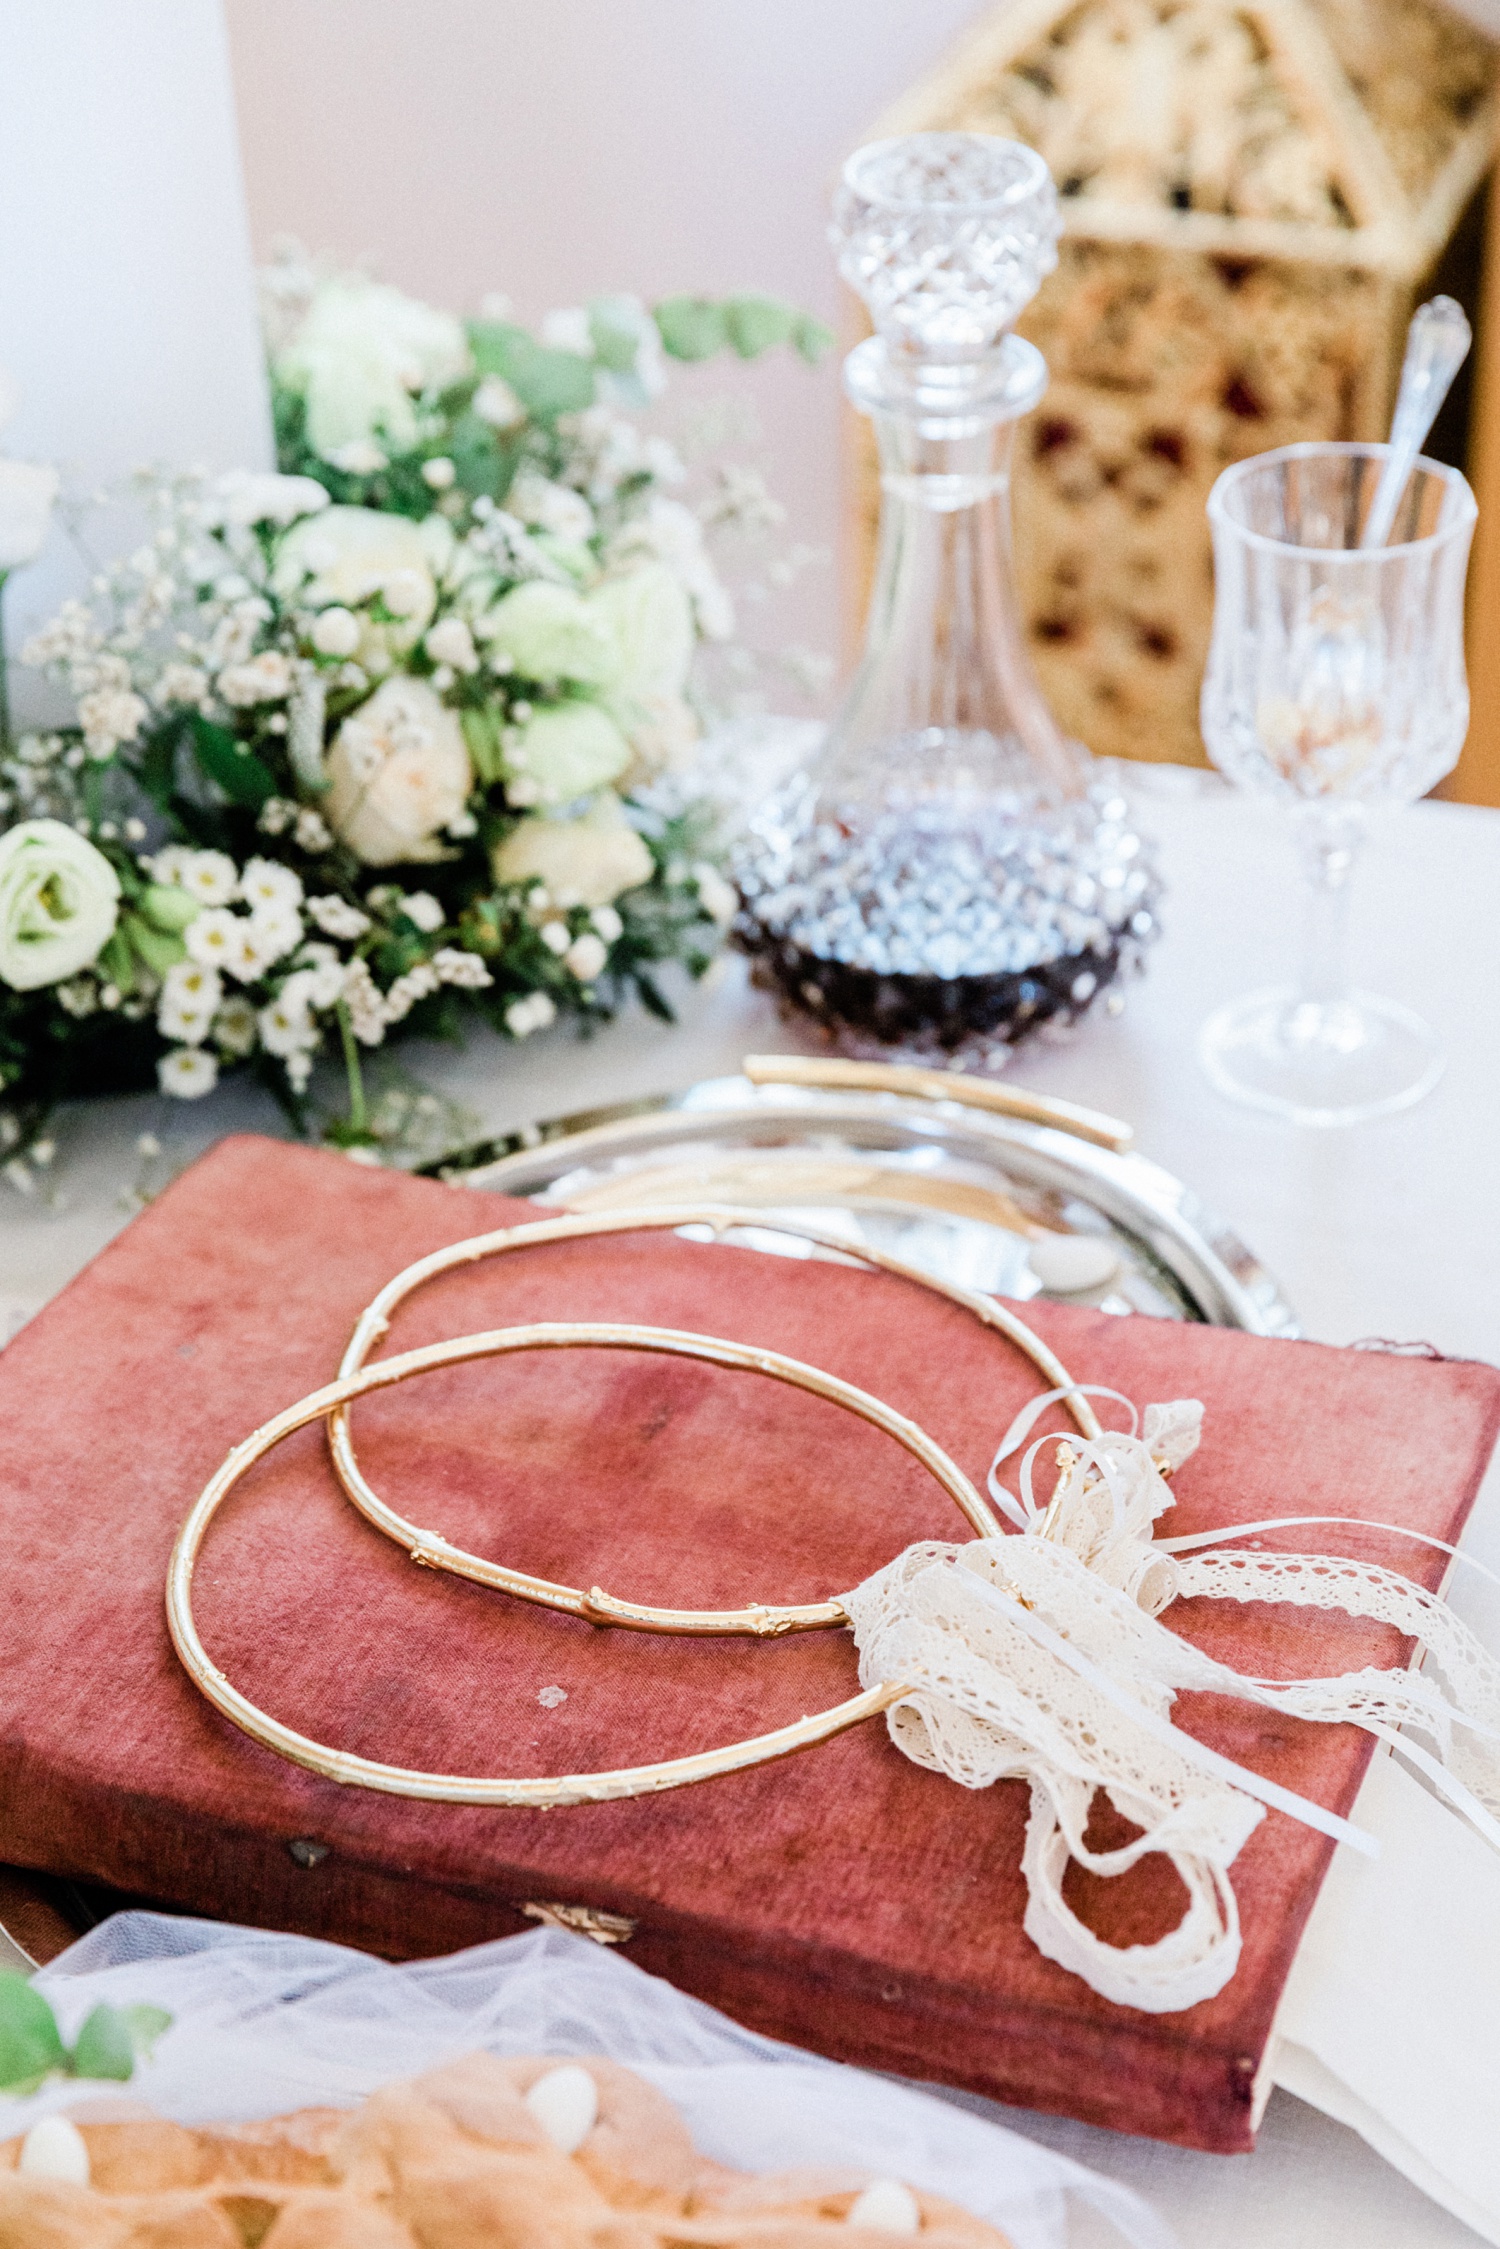 Greek church wedding table with decorated candles, a bible and Greek wedding crowns